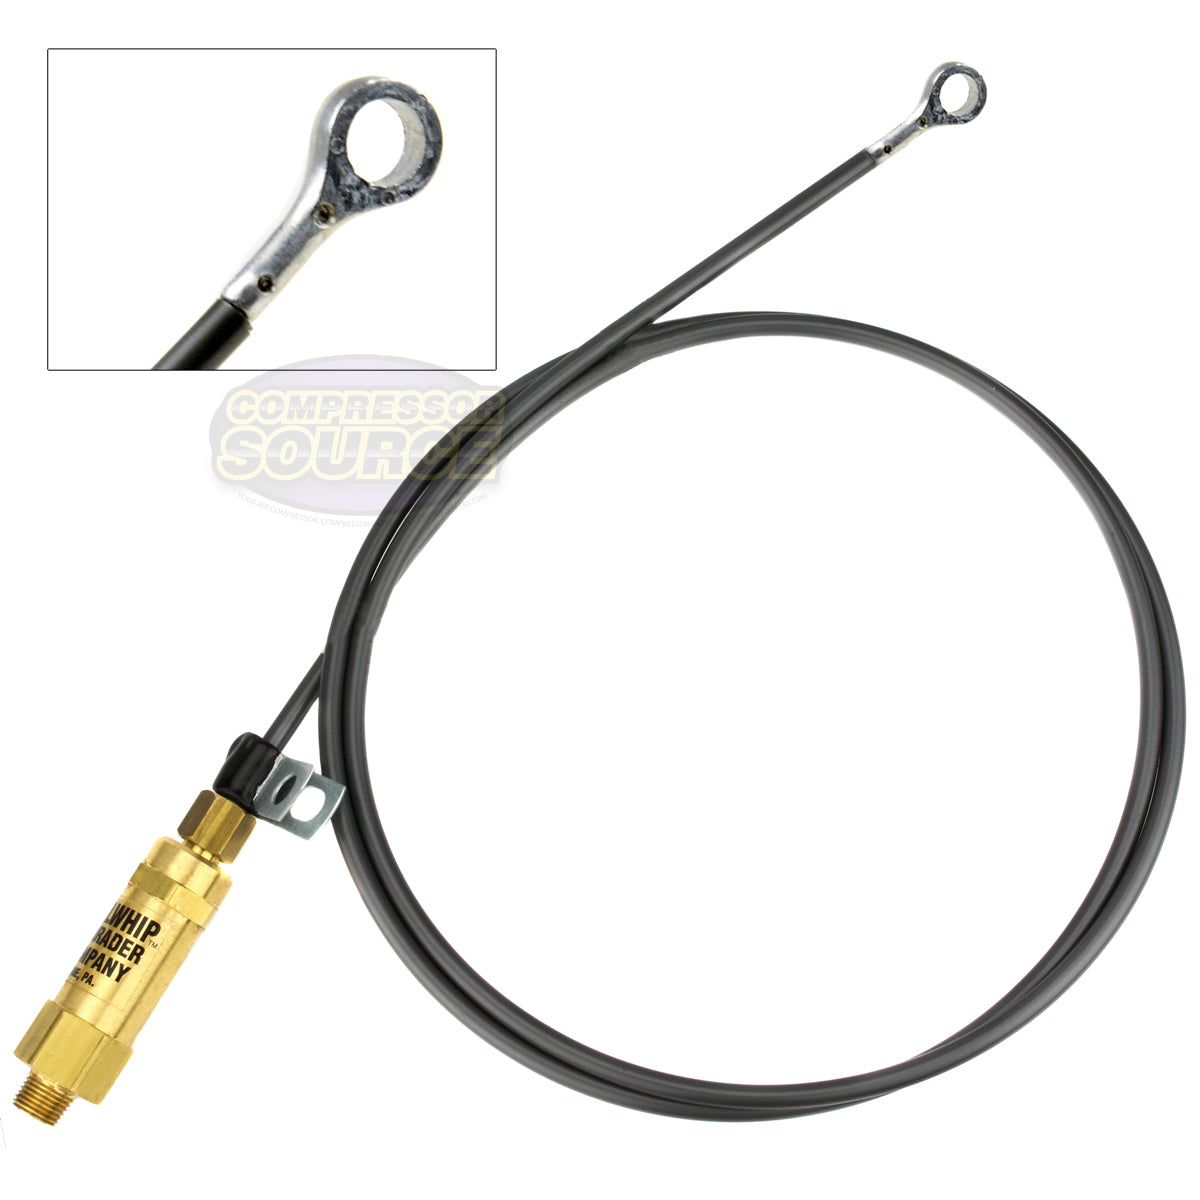 36" Eagle Air Compressor Engine Throttle Control Cable Bullwhip With Eyelet End